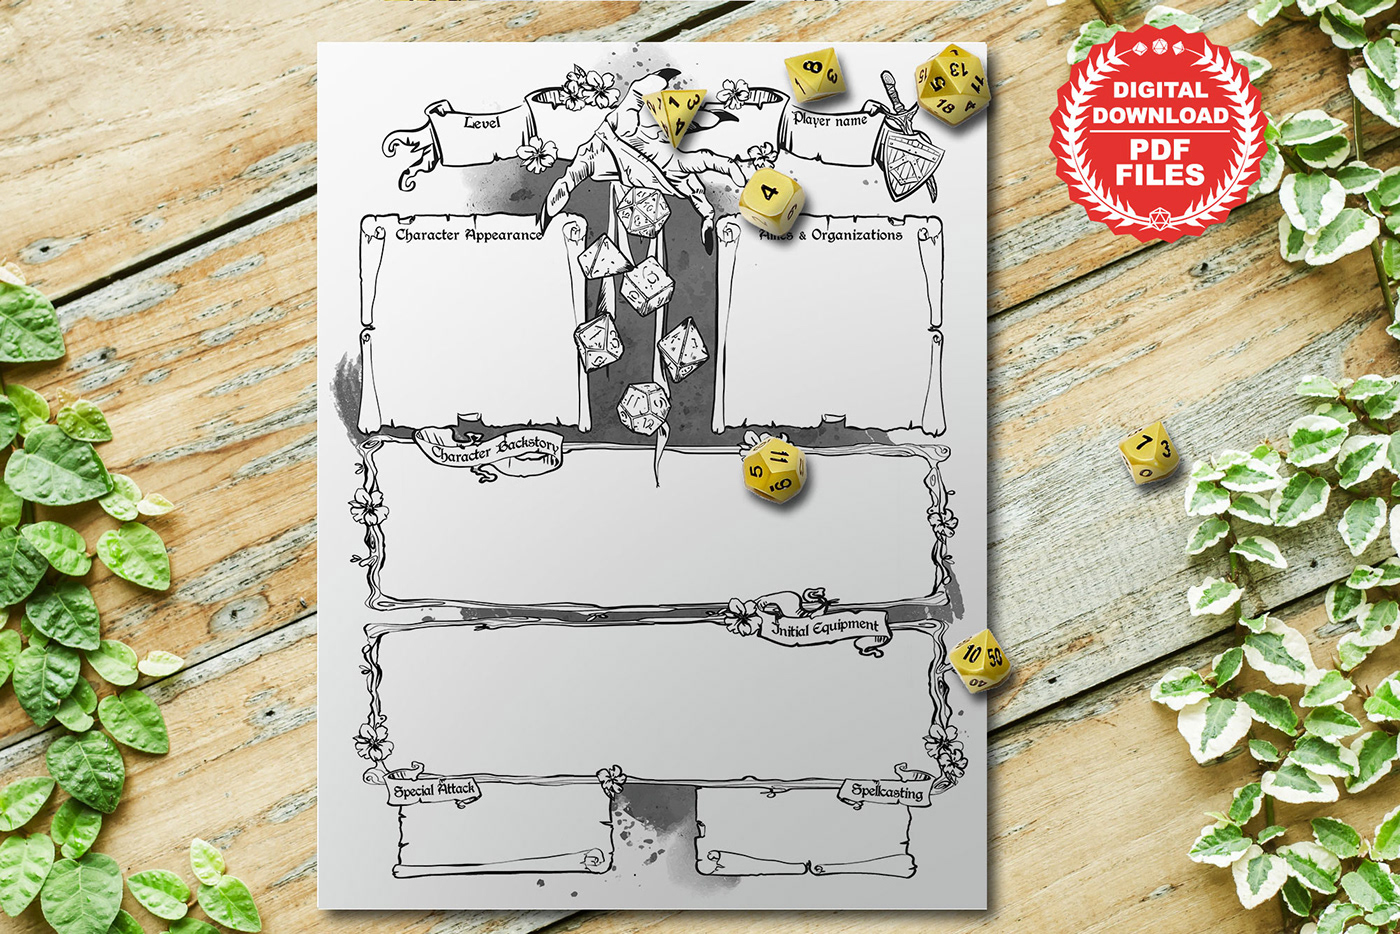 D&D digital file dnd Dungeons and Dragons Fillable Character Sheet ILLUSTRATION  pdf Printable Sheets RPG game table top rpg